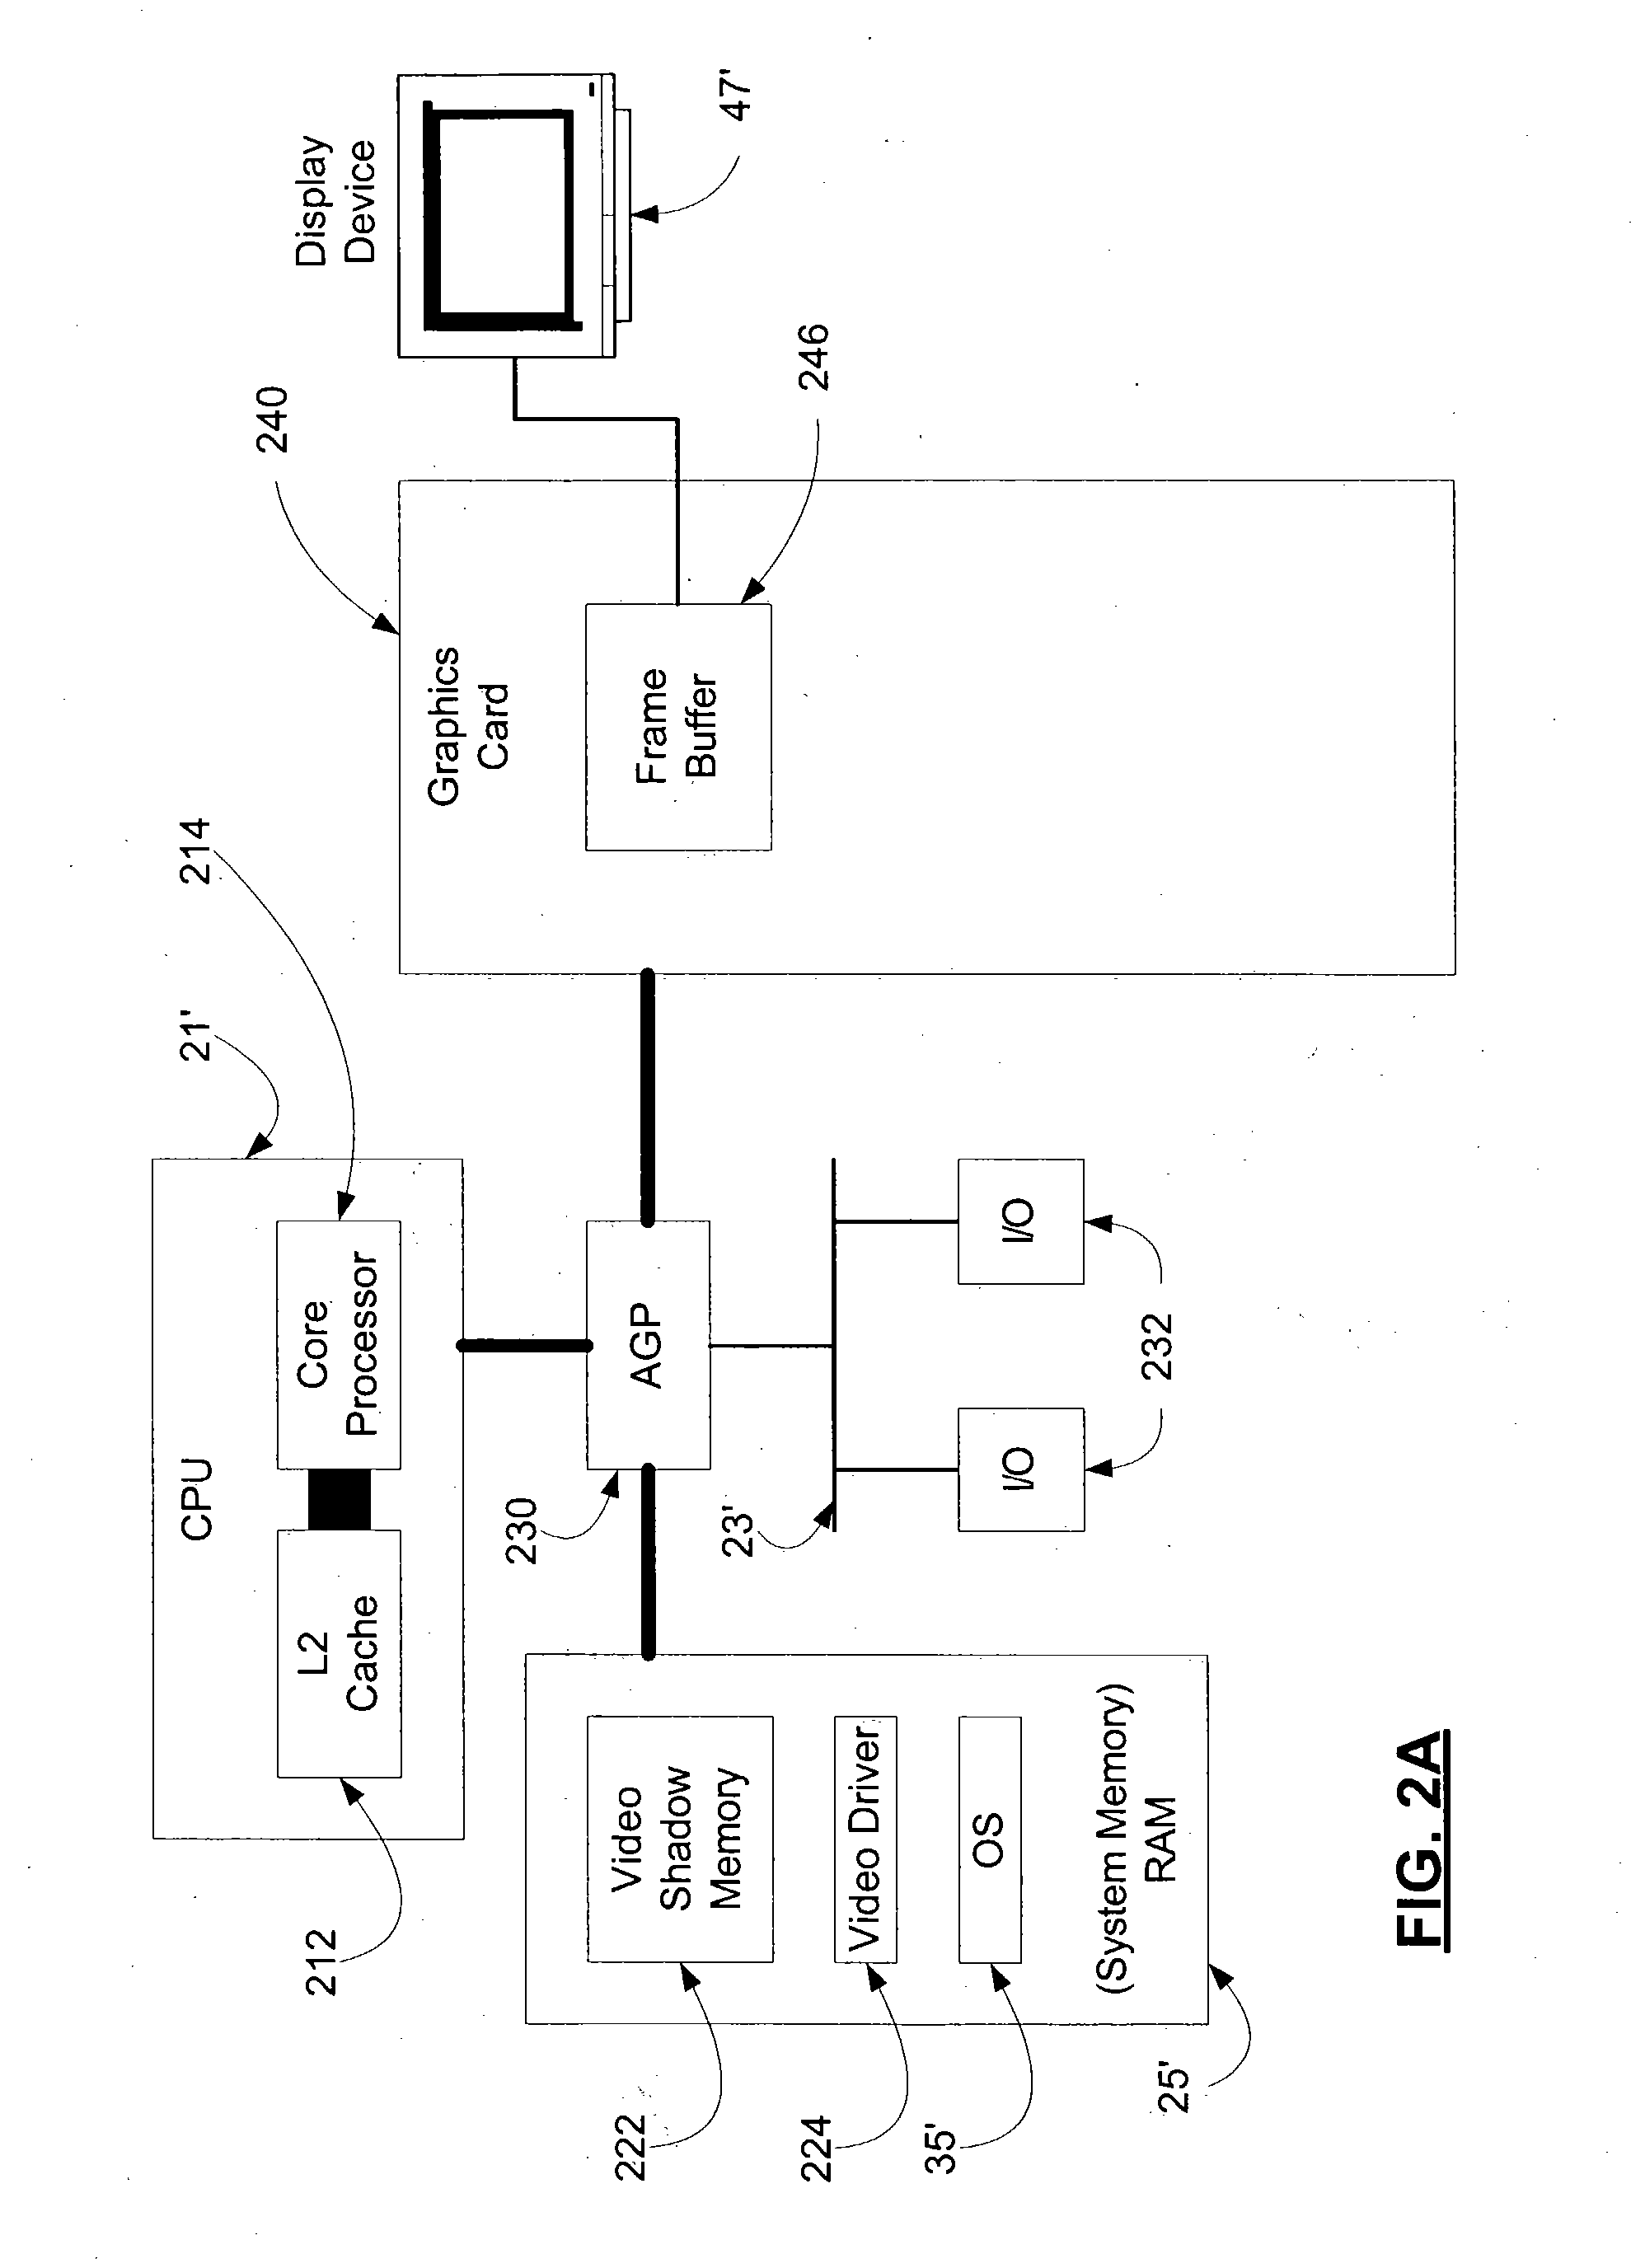 Systems and methods for updating a frame buffer based on arbitrary graphics calls